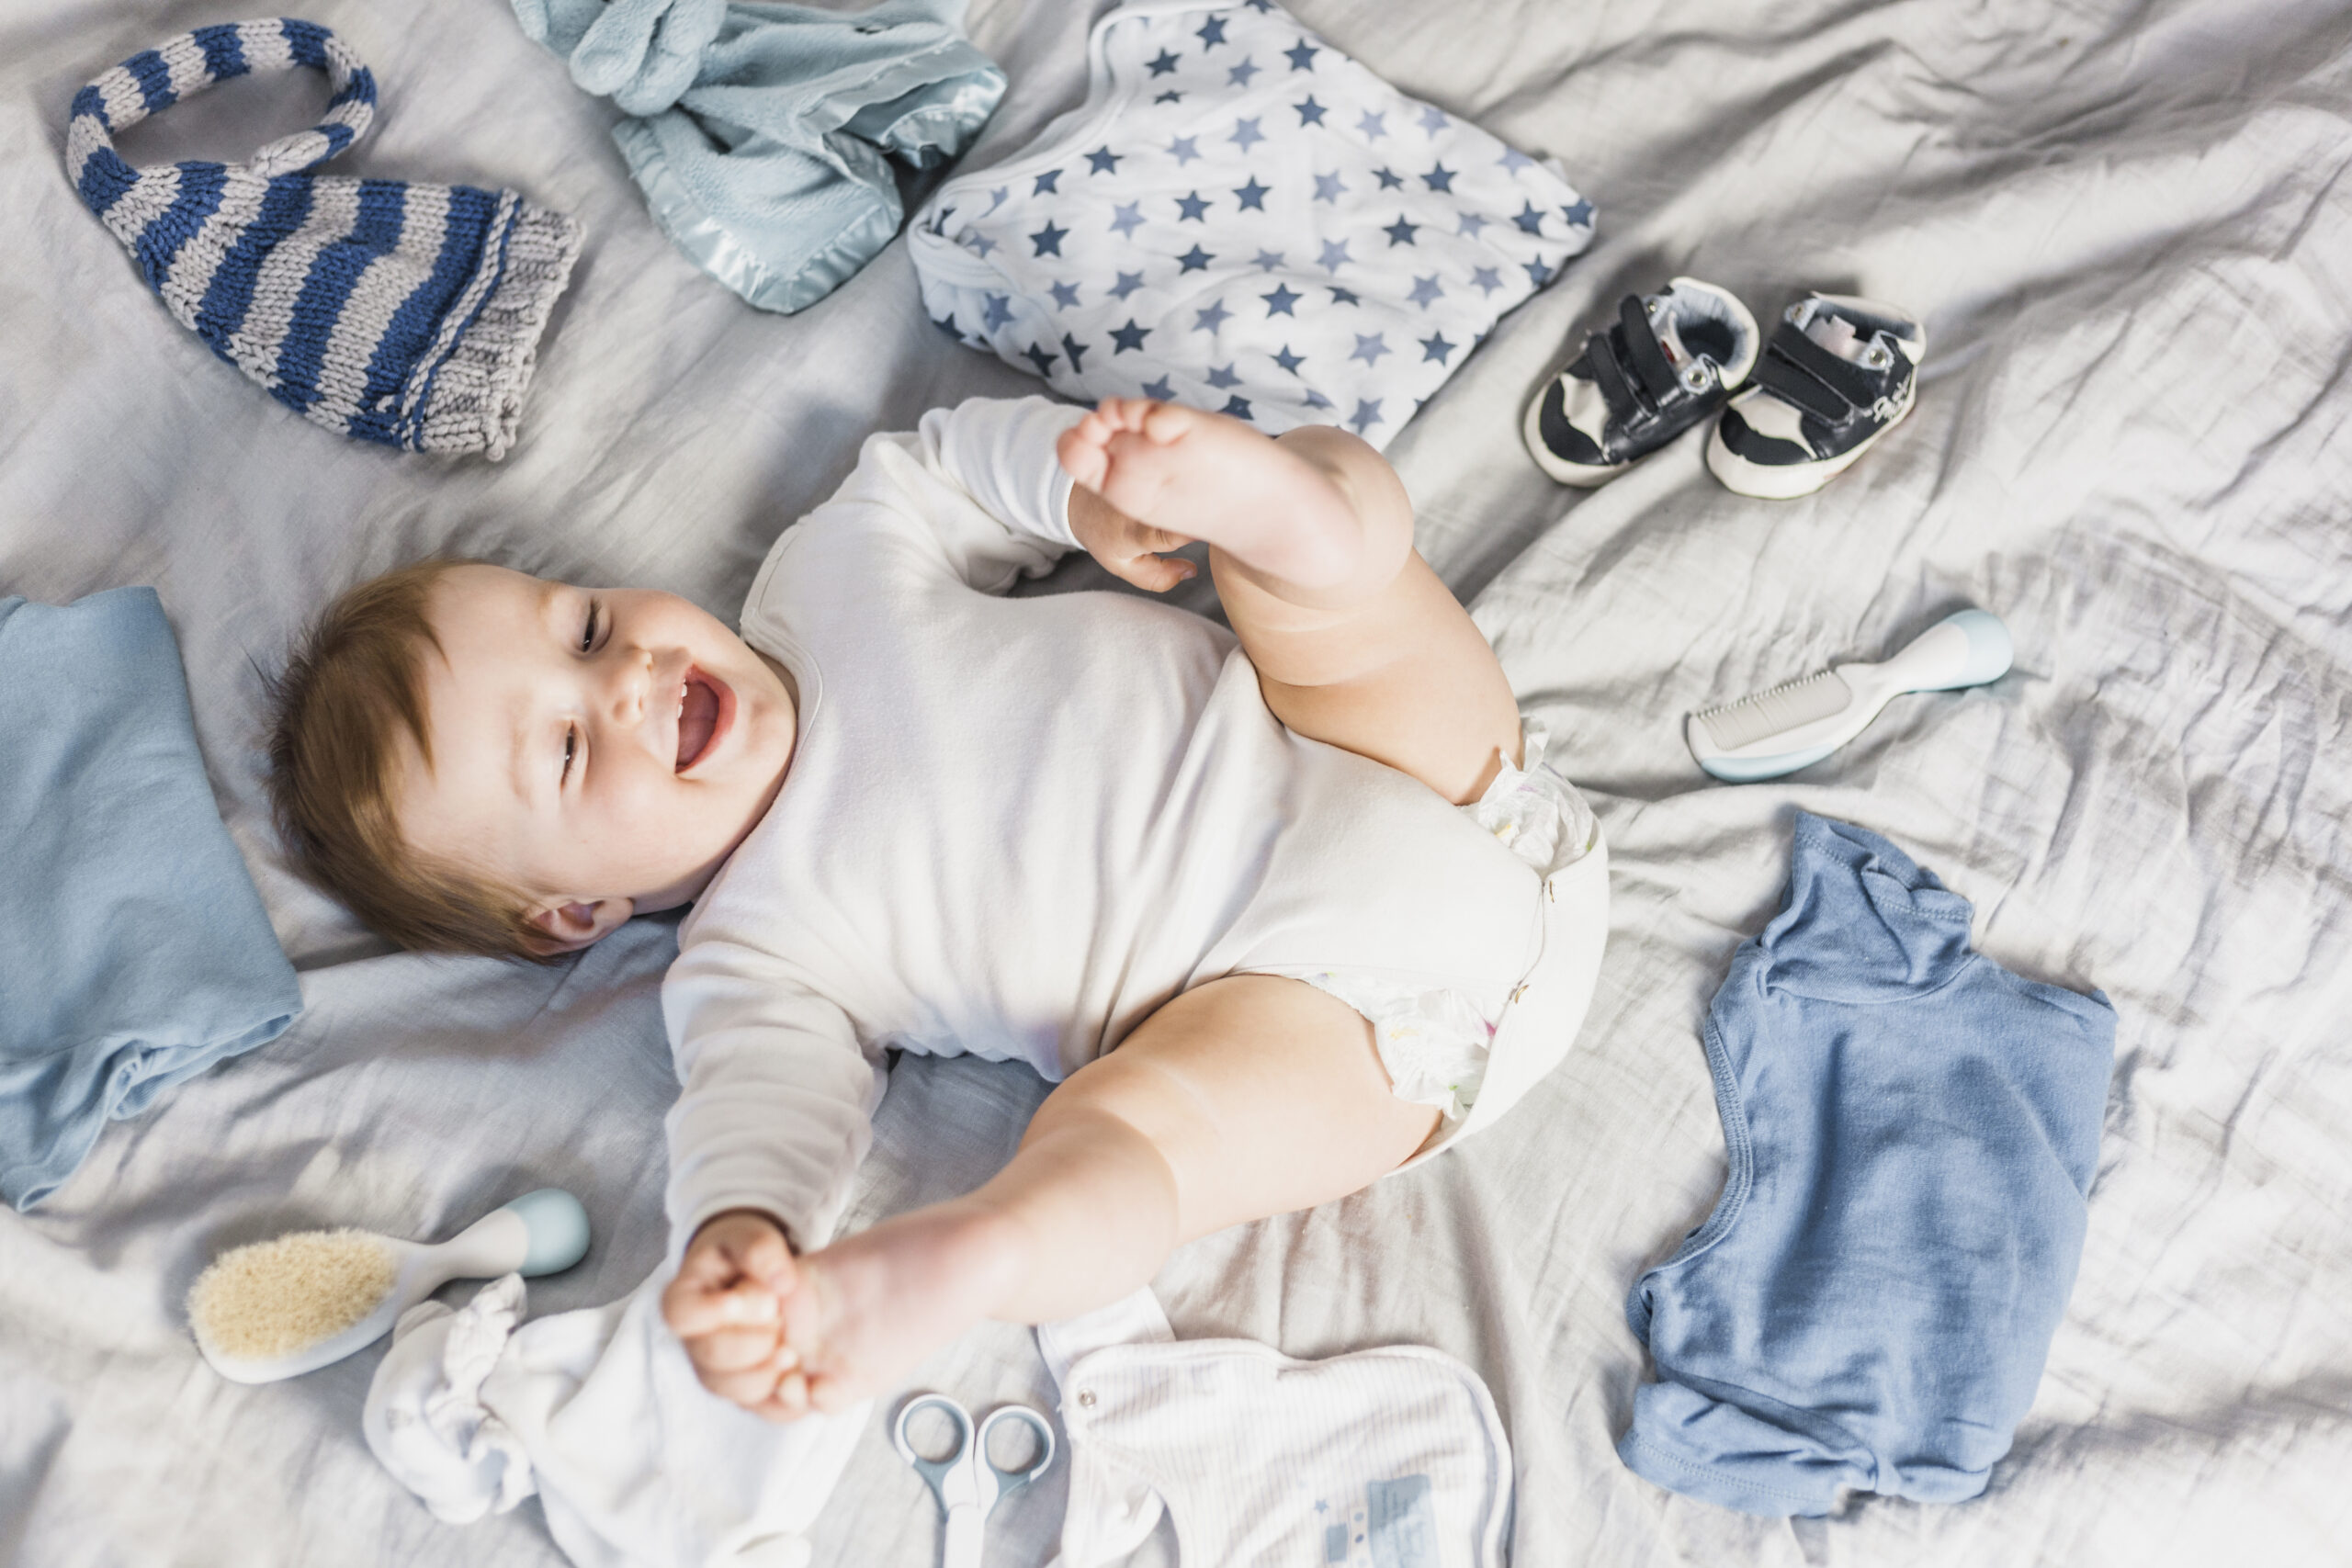 top-view-blonde-baby-surrounded-by-clothes